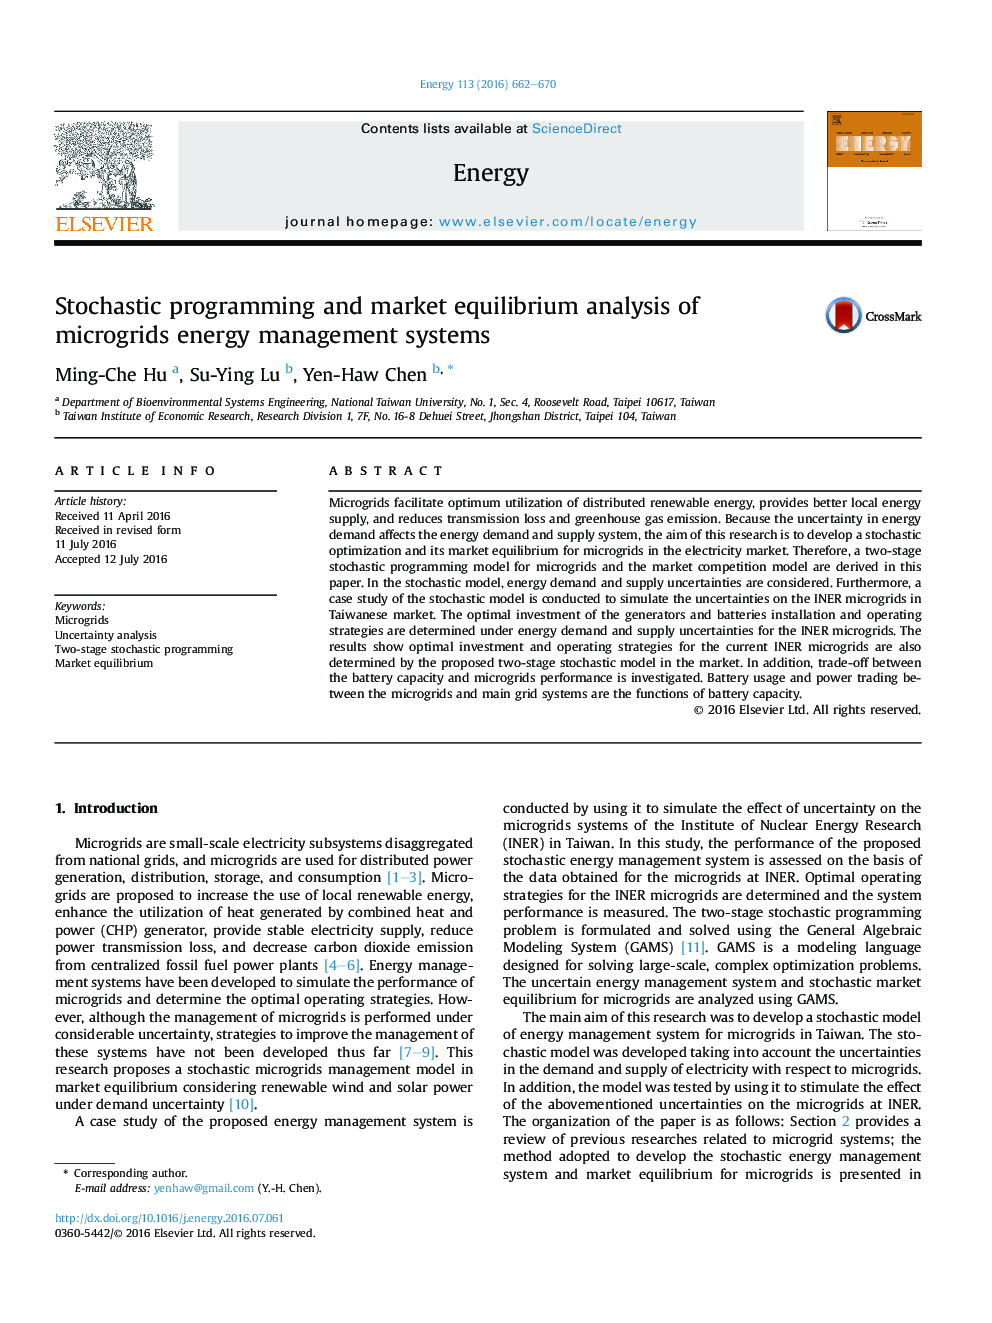 Stochastic programming and market equilibrium analysis of microgrids energy management systems